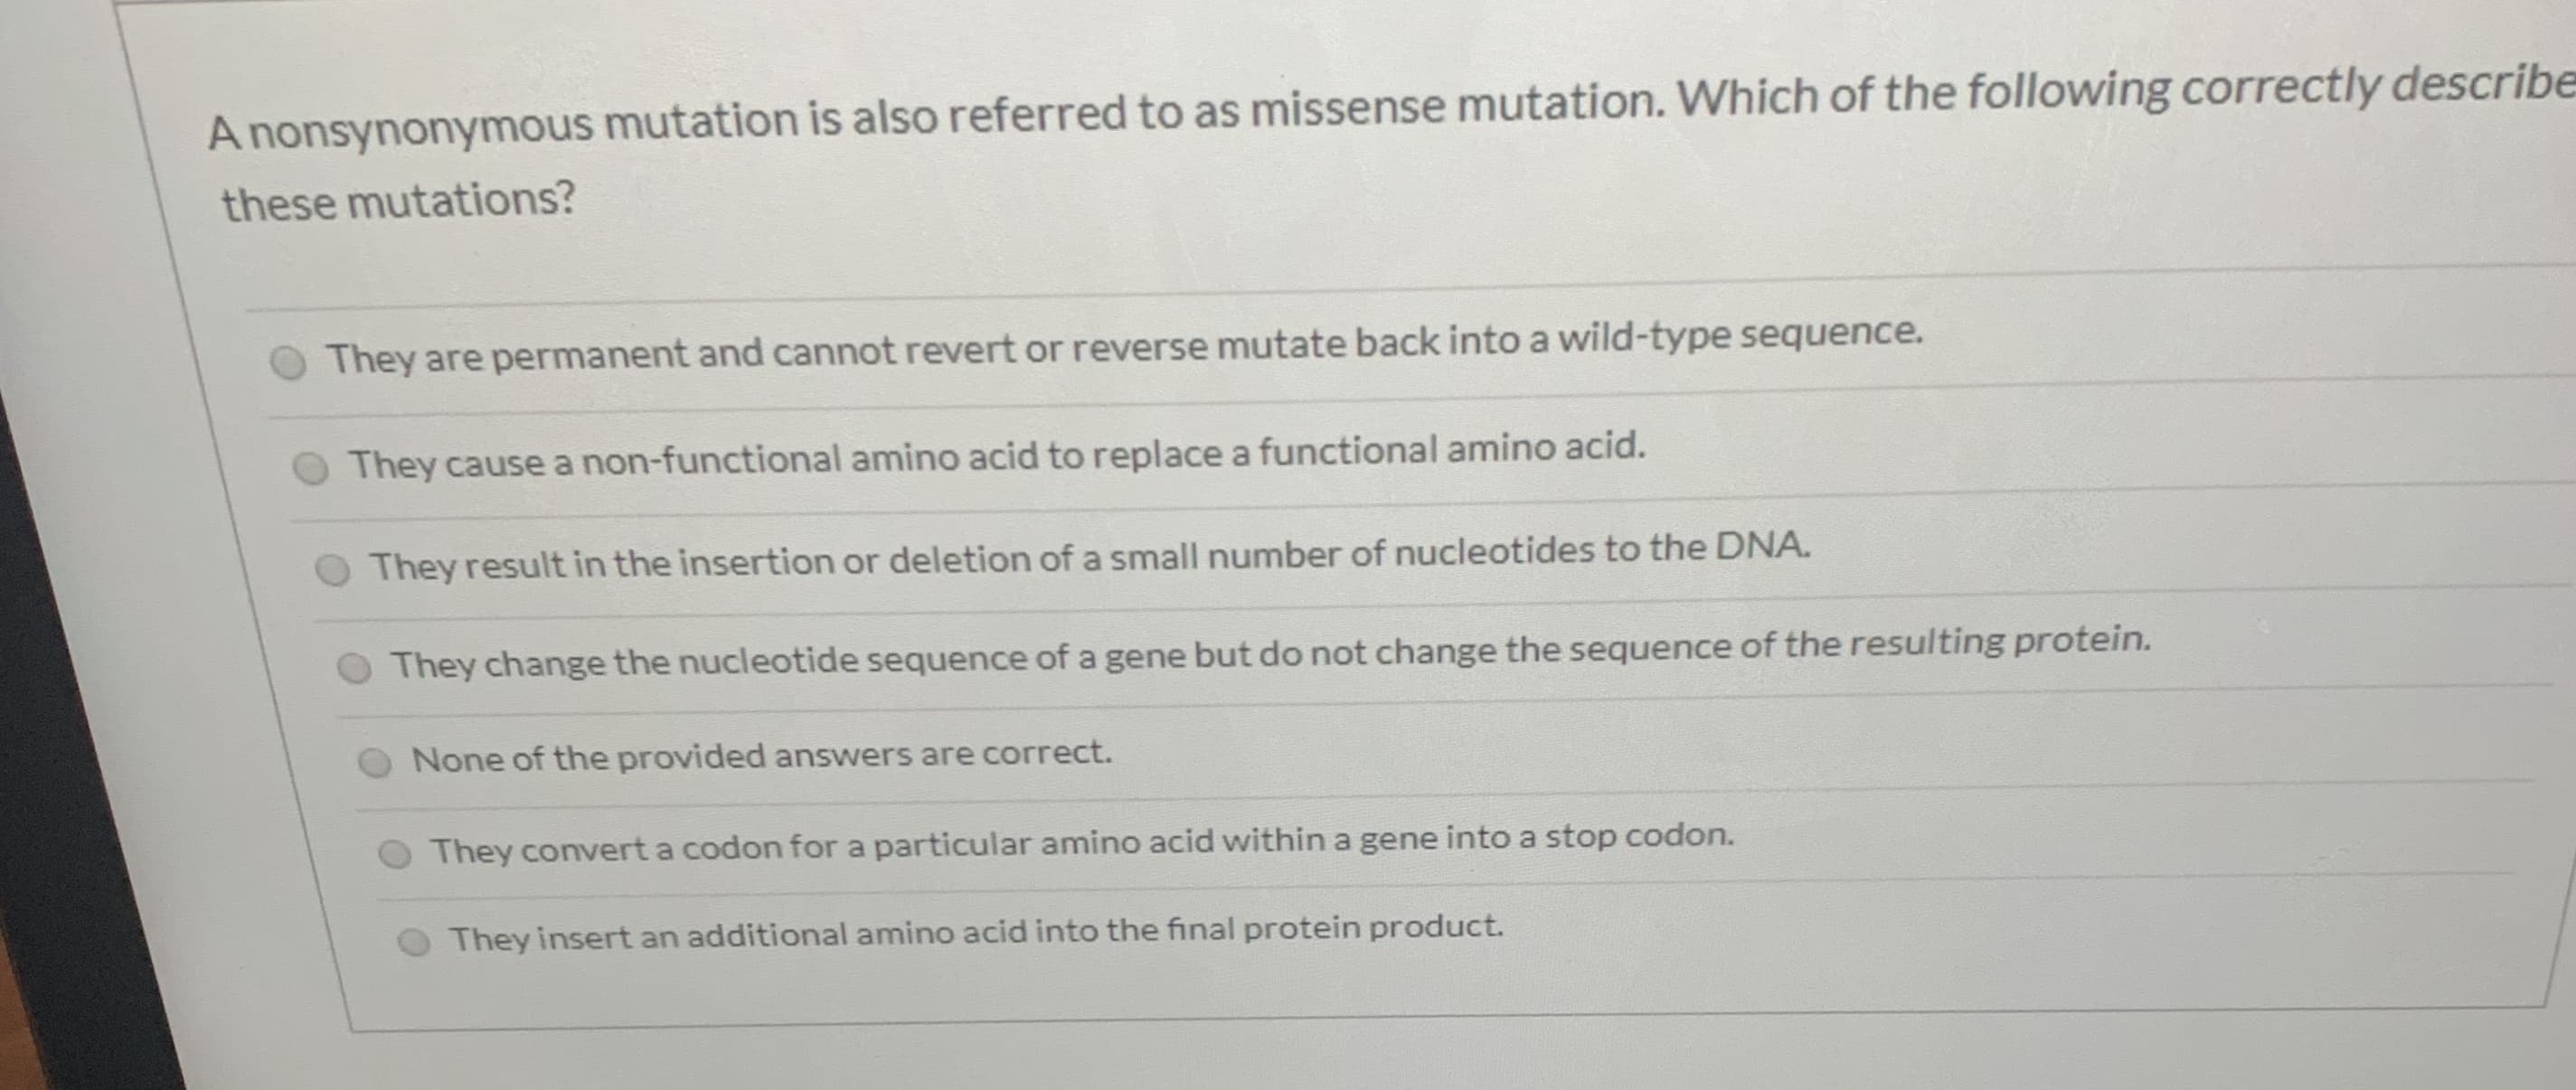 A nonsynonymous mutation is also referred to as missense mutation. Which of the following correctly describe
these mutations?
They are permanent and cannot revert or reverse mutate back into a wild-type sequence.
They cause a non-functional amino acid to replace a functional amino acid.
O They result in the insertion or deletion of a small number of nucleotides to the DNA.
They change the nucleotide sequence of a gene but do not change the sequence of the resulting protein.
None of the provided answers are correct.
They convert a codon for a particular amino acid within a gene into a stop codon.
They insert an additional amino acid into the final protein product.
